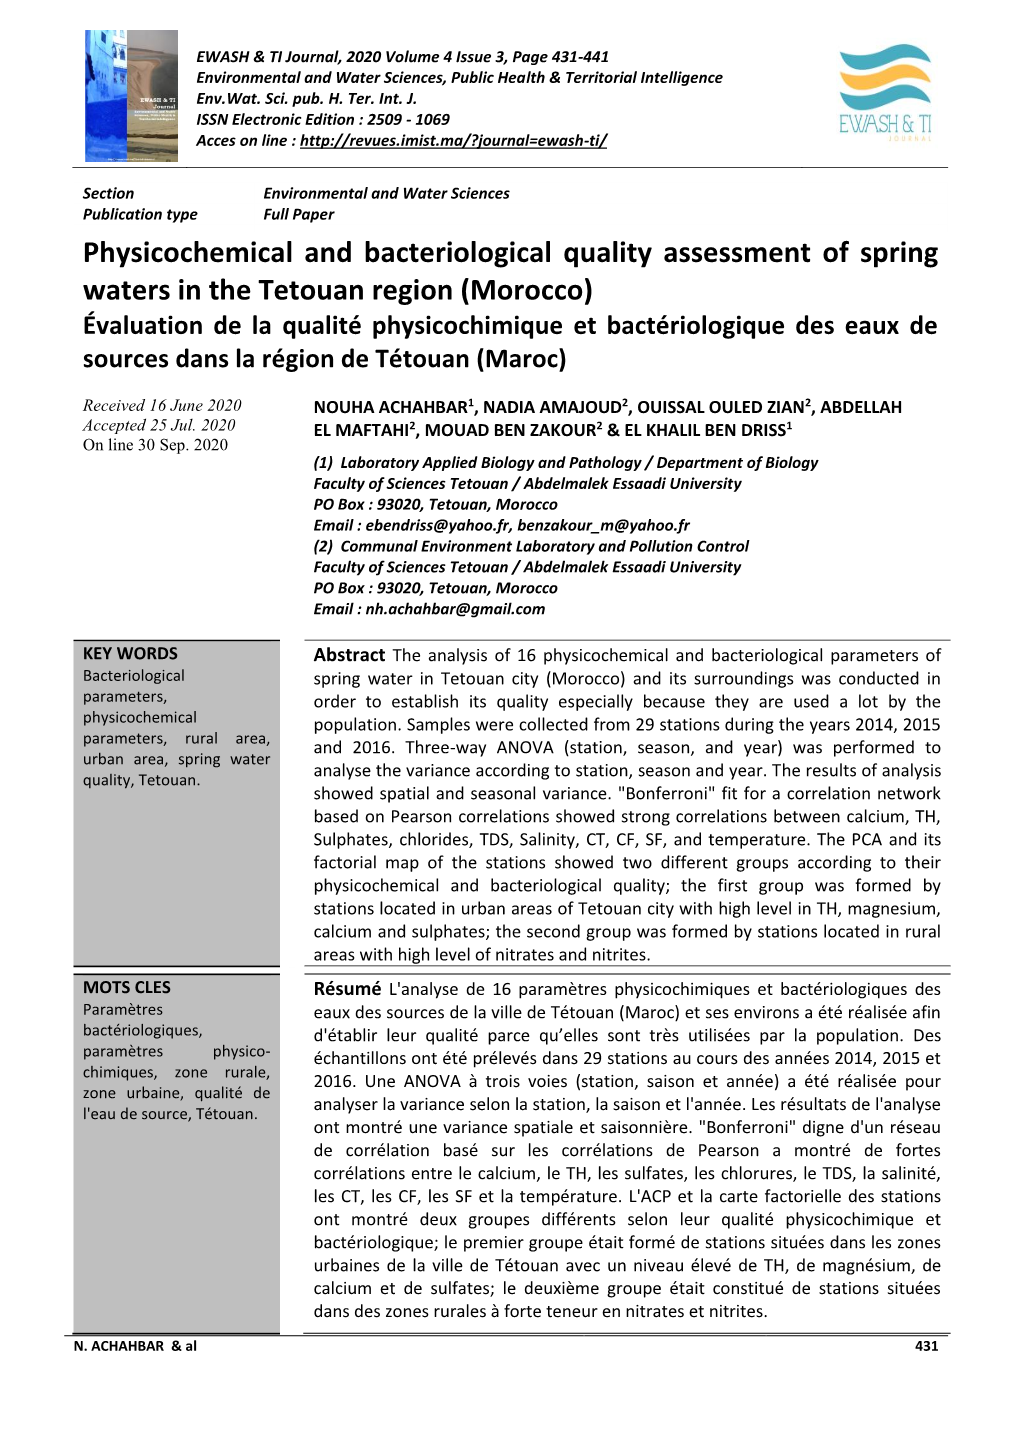 Physicochemical and Bacteriological Quality Assessment of Spring Waters in the Tetouan Region (Morocco)